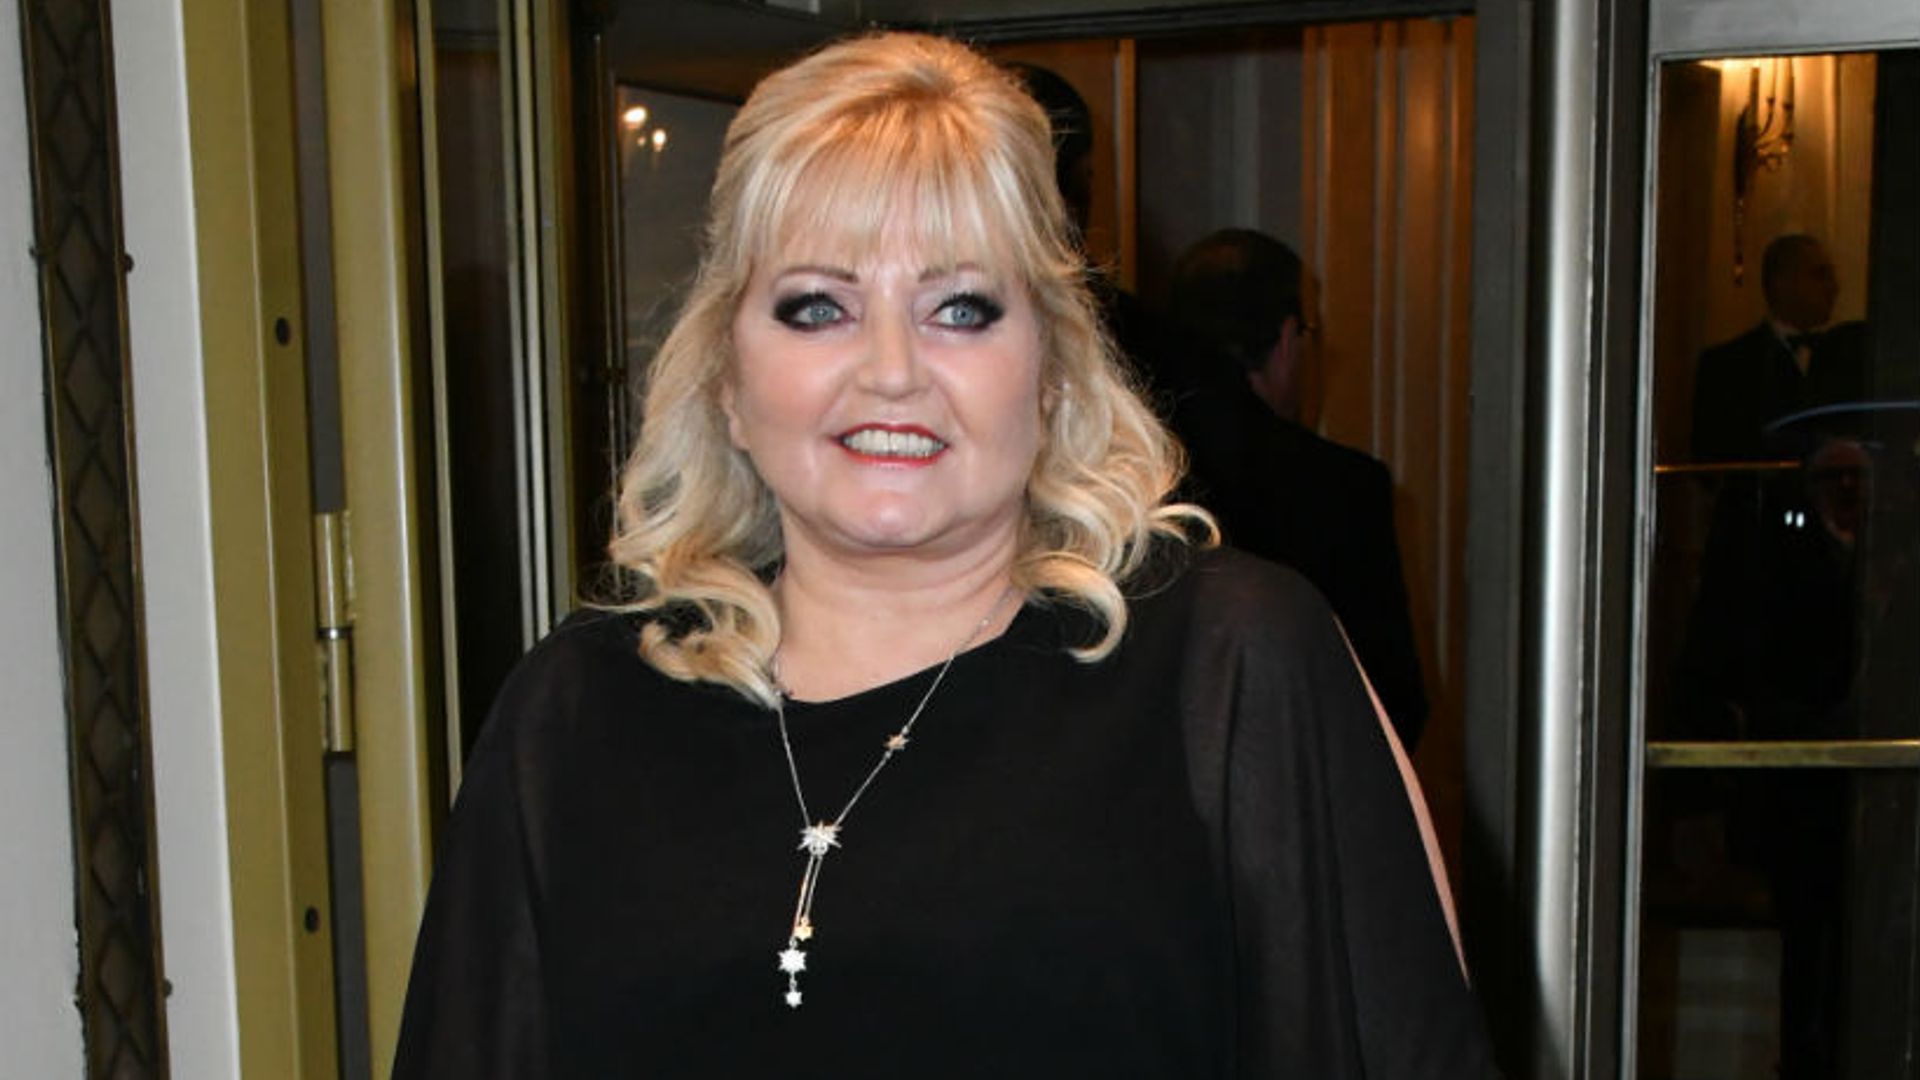 Linda Nolan opens up about breast cancer battle: 'I'm scared of dying'